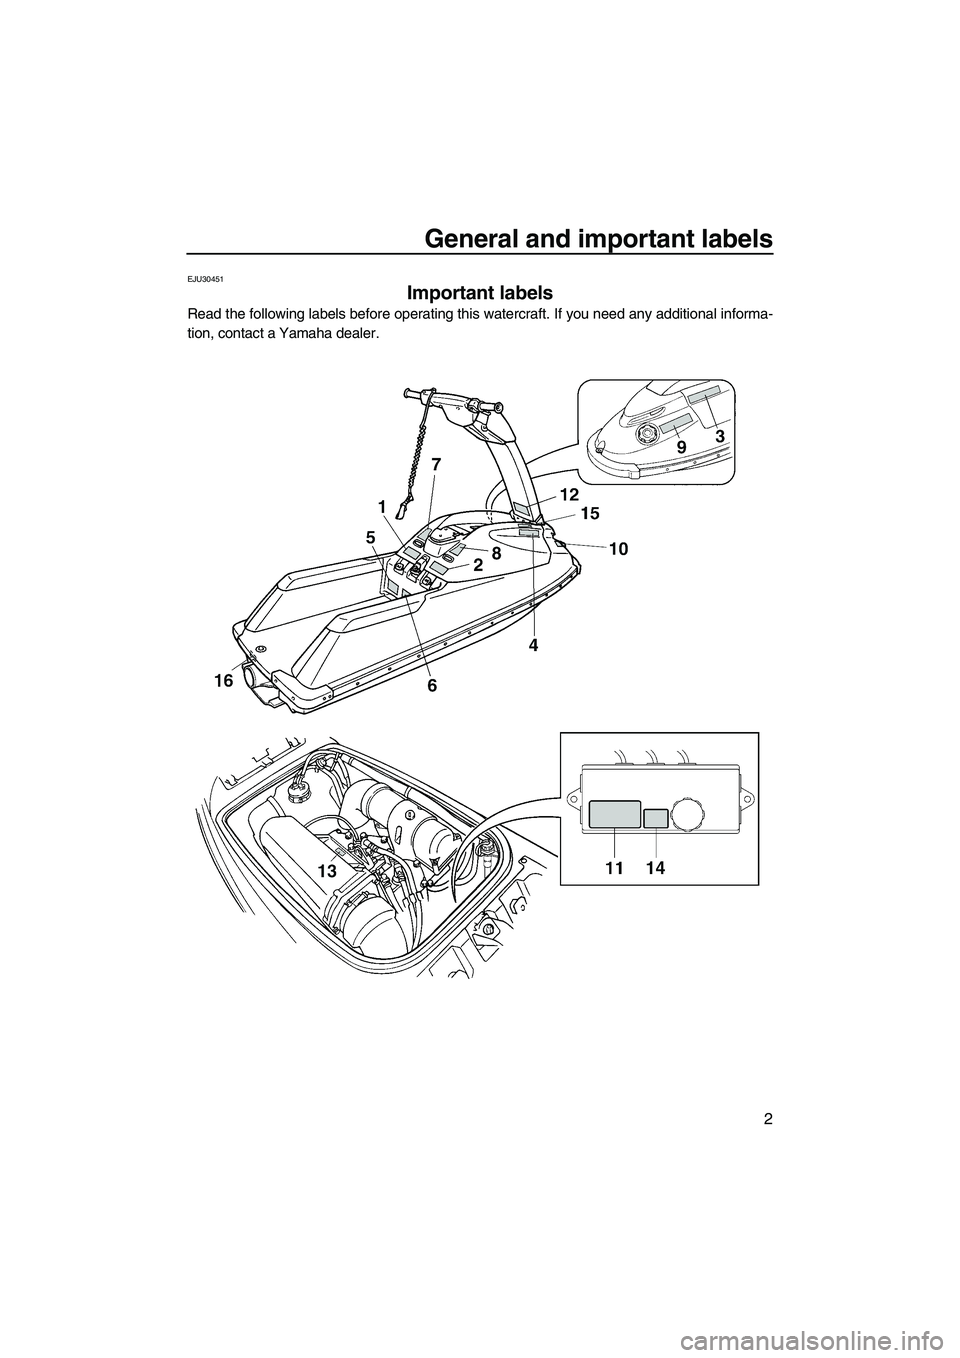 YAMAHA SUPERJET 2009  Owners Manual General and important labels
2
EJU30451
Important labels 
Read the following labels before operating this watercraft. If you need any additional informa-
tion, contact a Yamaha dealer.
UF2F71E0.book  